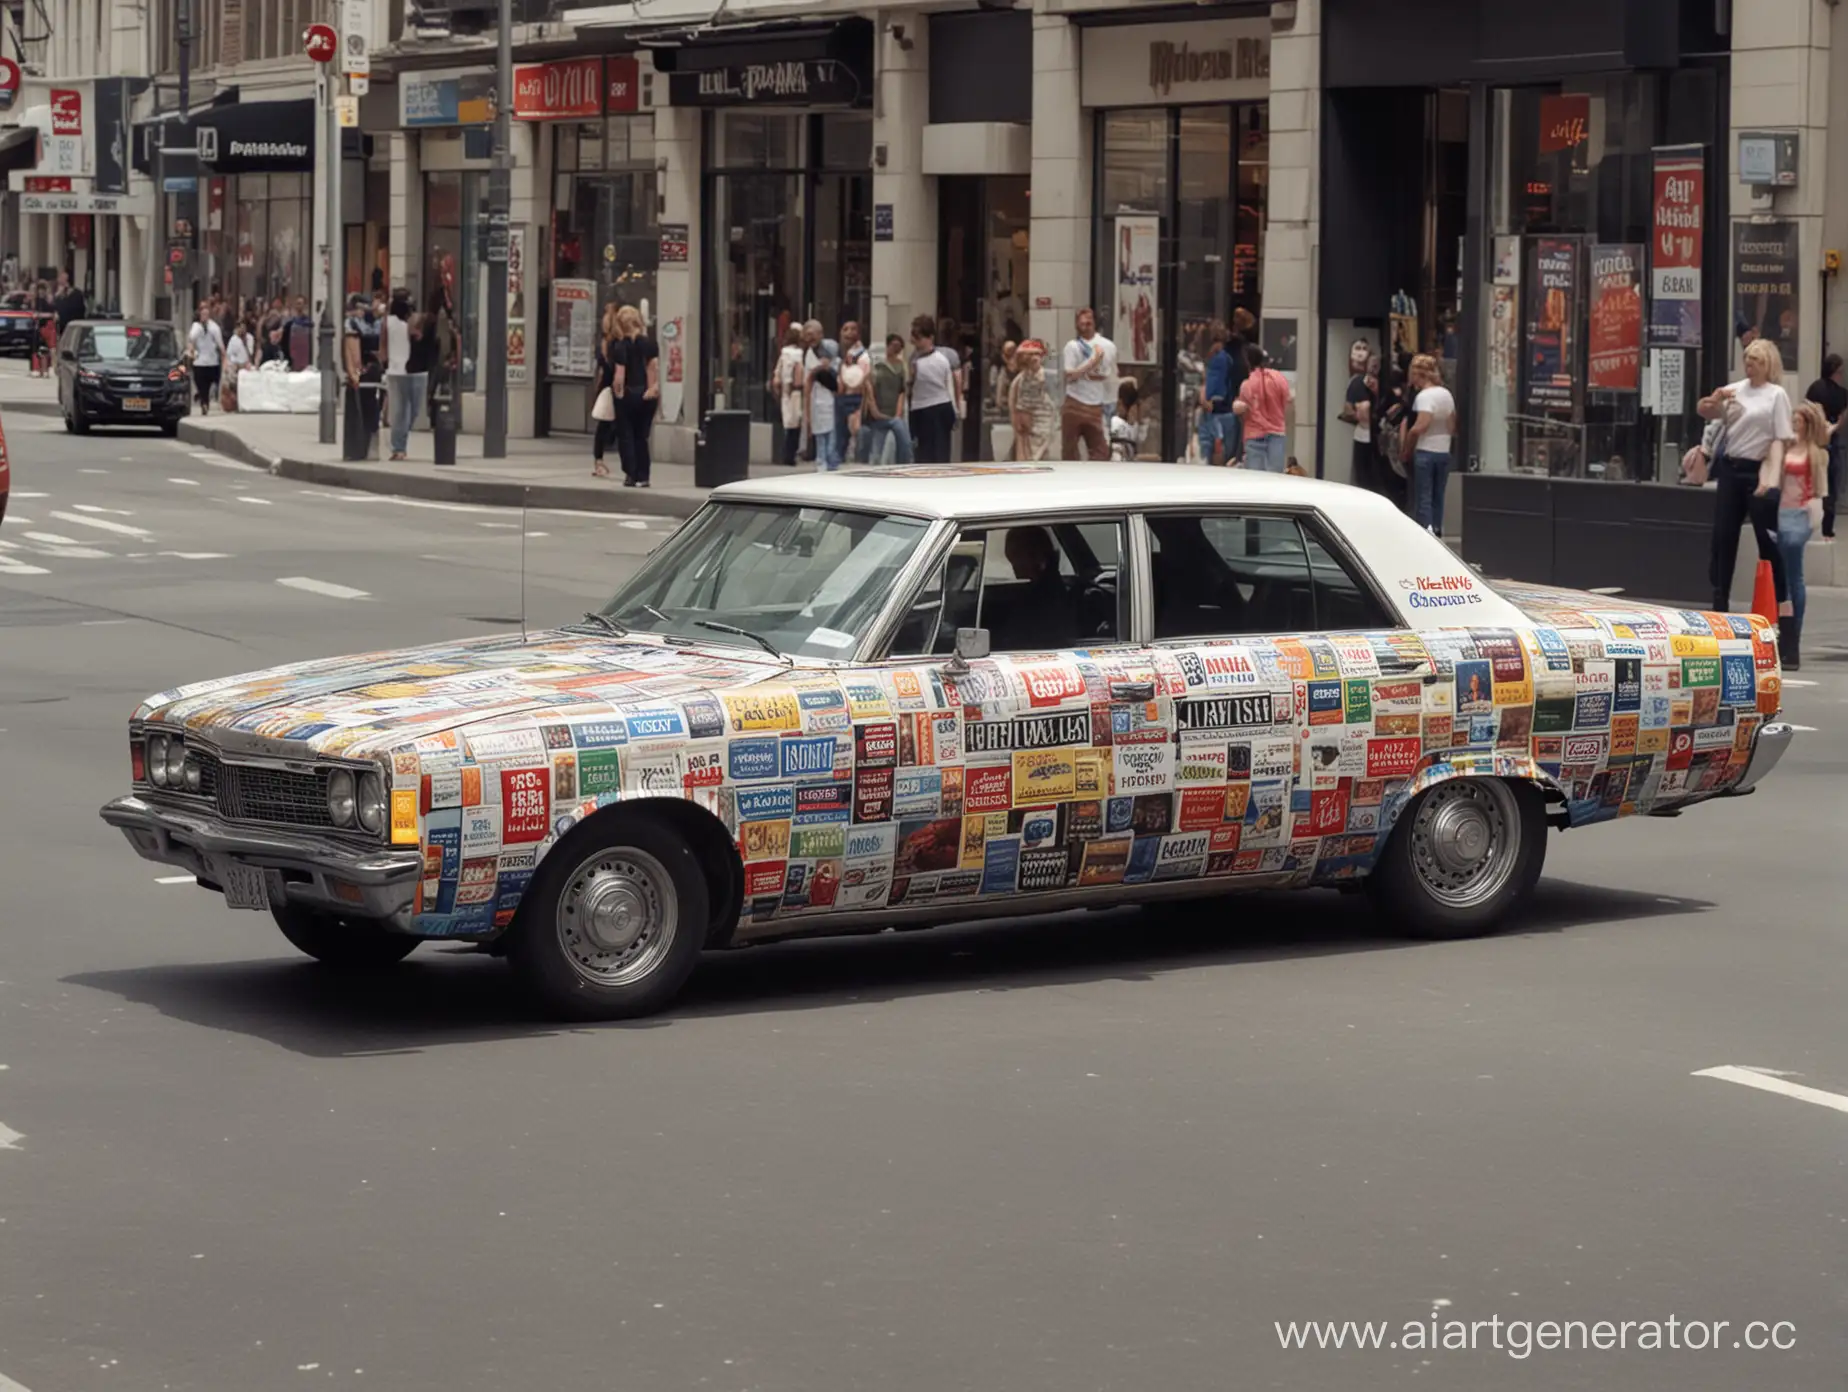 Vibrant-Car-Covered-in-Street-Advertising